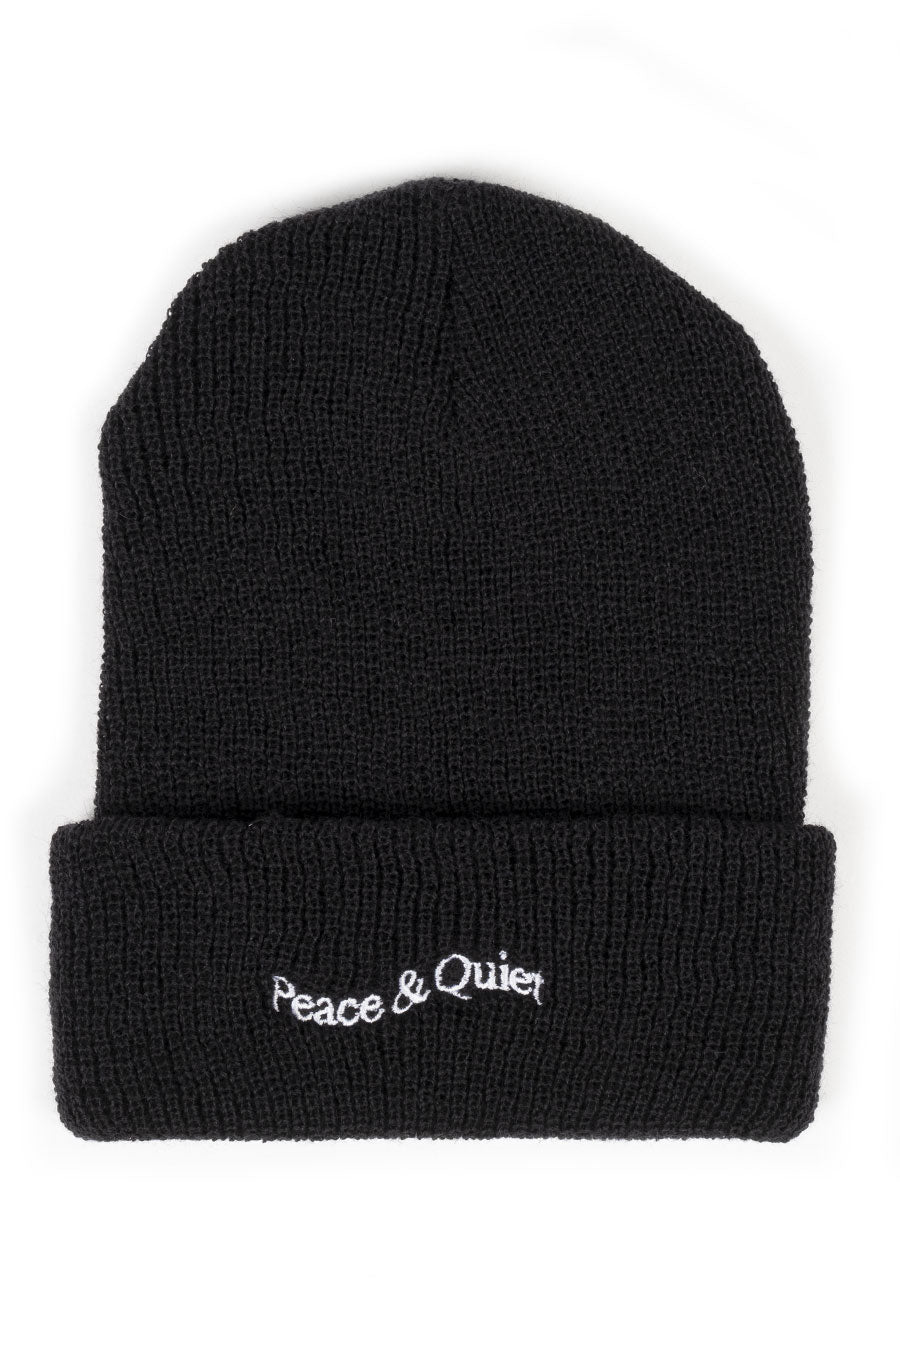 THE MUSEUM OF PEACE AND QUIET WORDMARK BEANIE BLACK